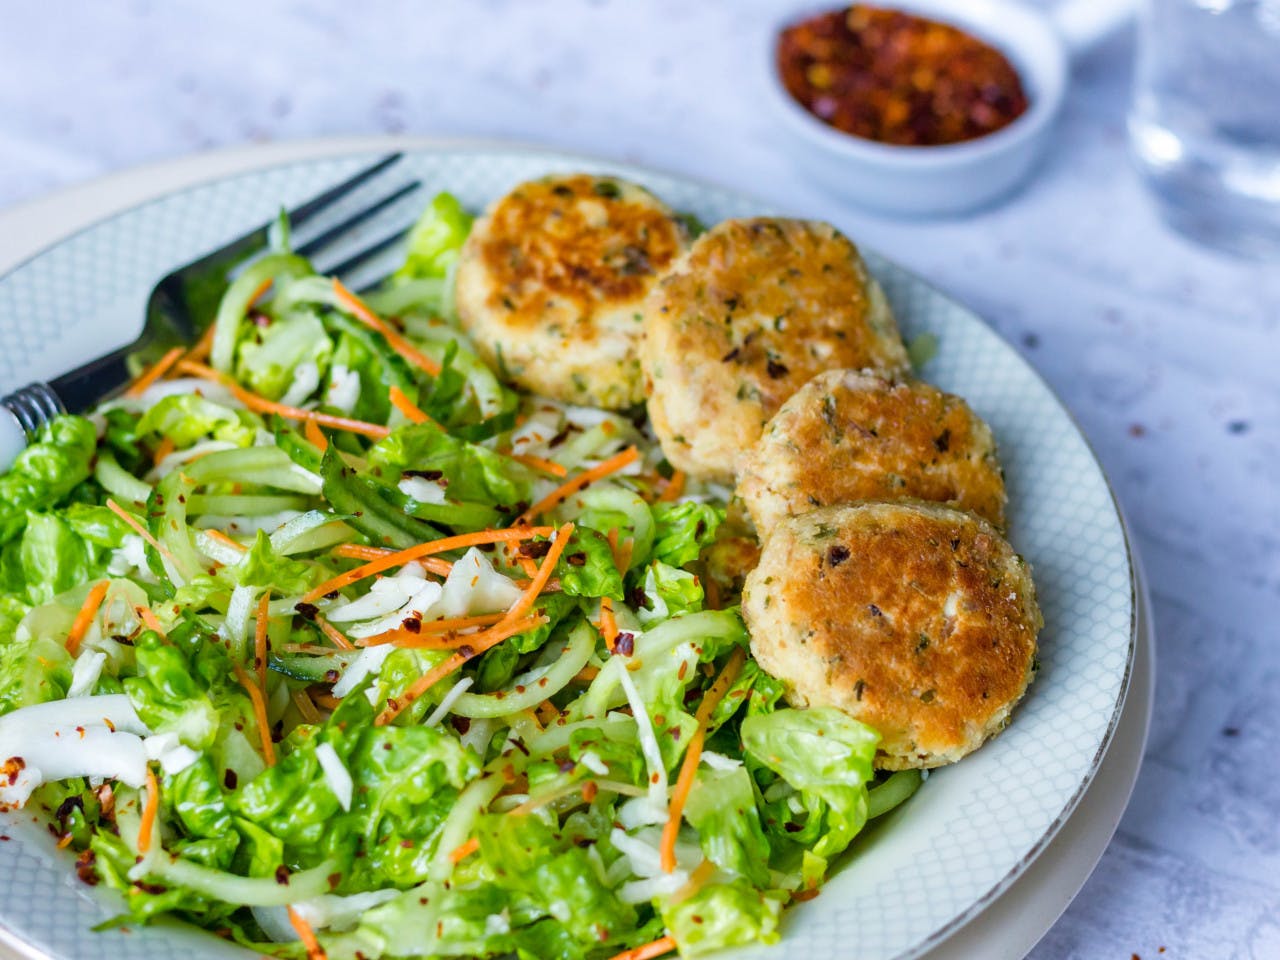 Fish cakes with Asian salad